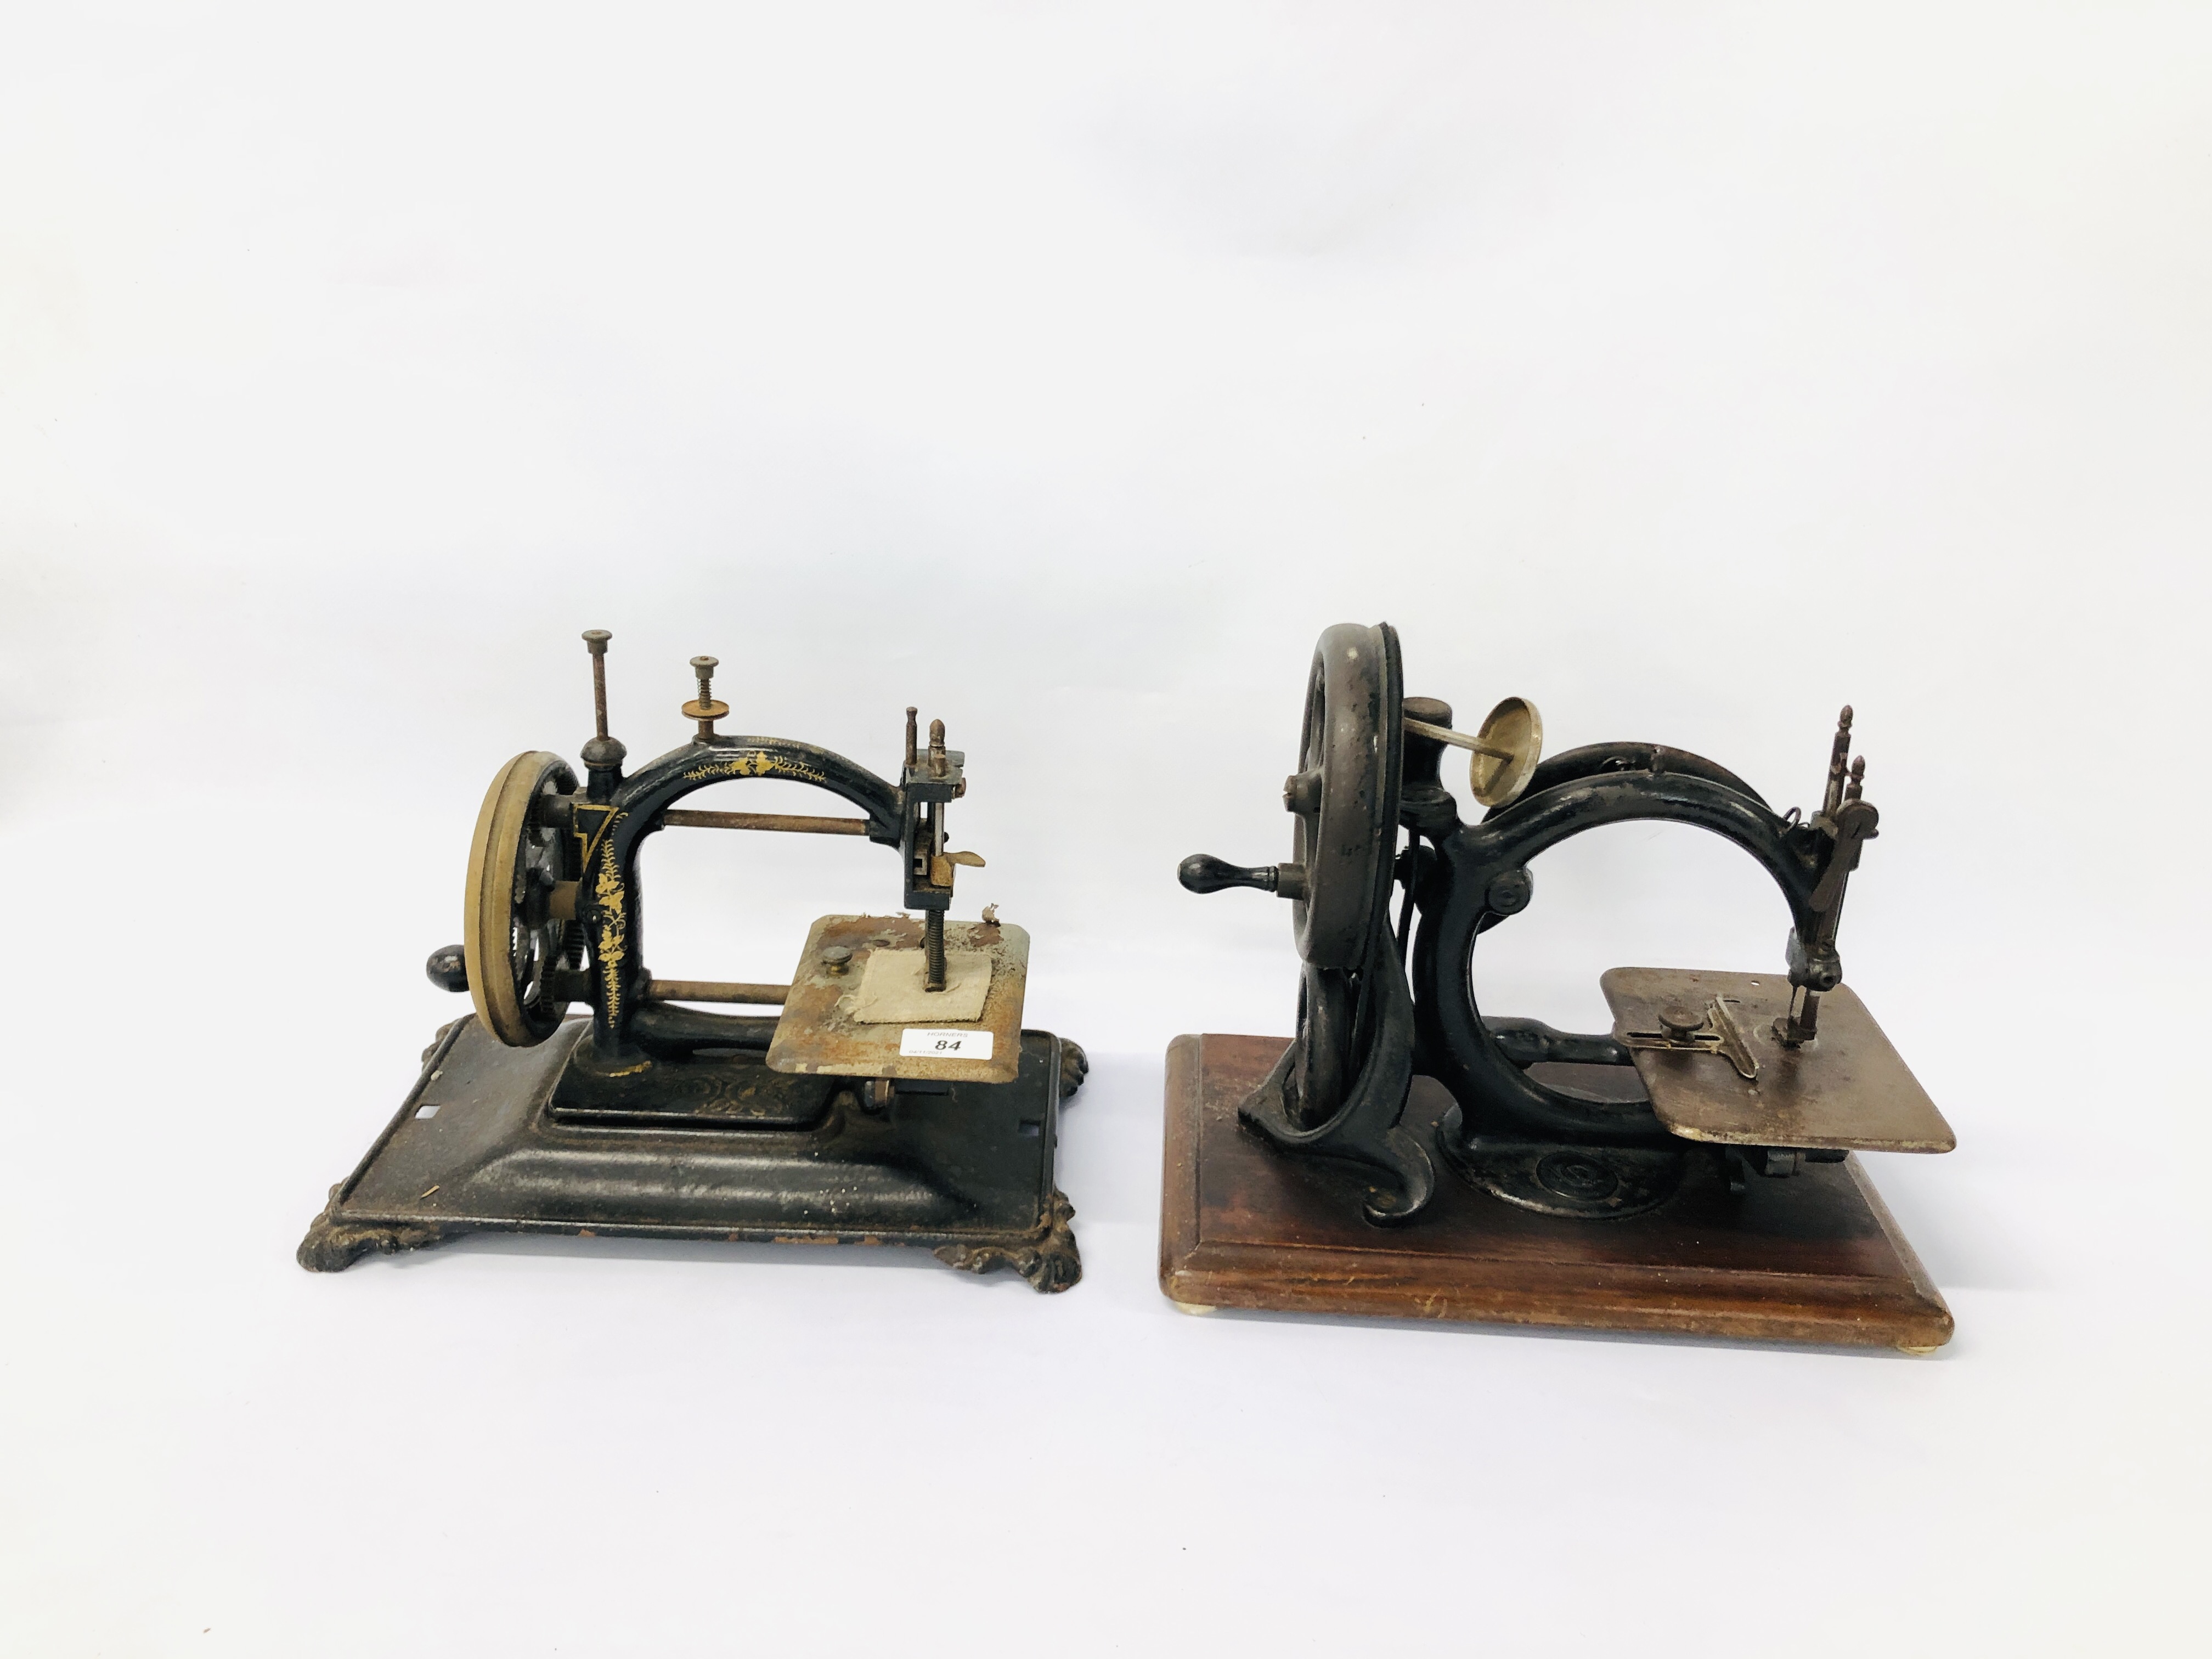 2 X VINTAGE SEWING MACHINES ONE HAVING A BLACK LACQUERED AND GILT FINISH